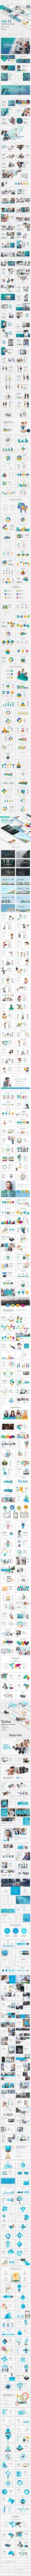 GraphicRiver 3 in 1 Business Jun 11 Bundle Powerpoint Template 21098201